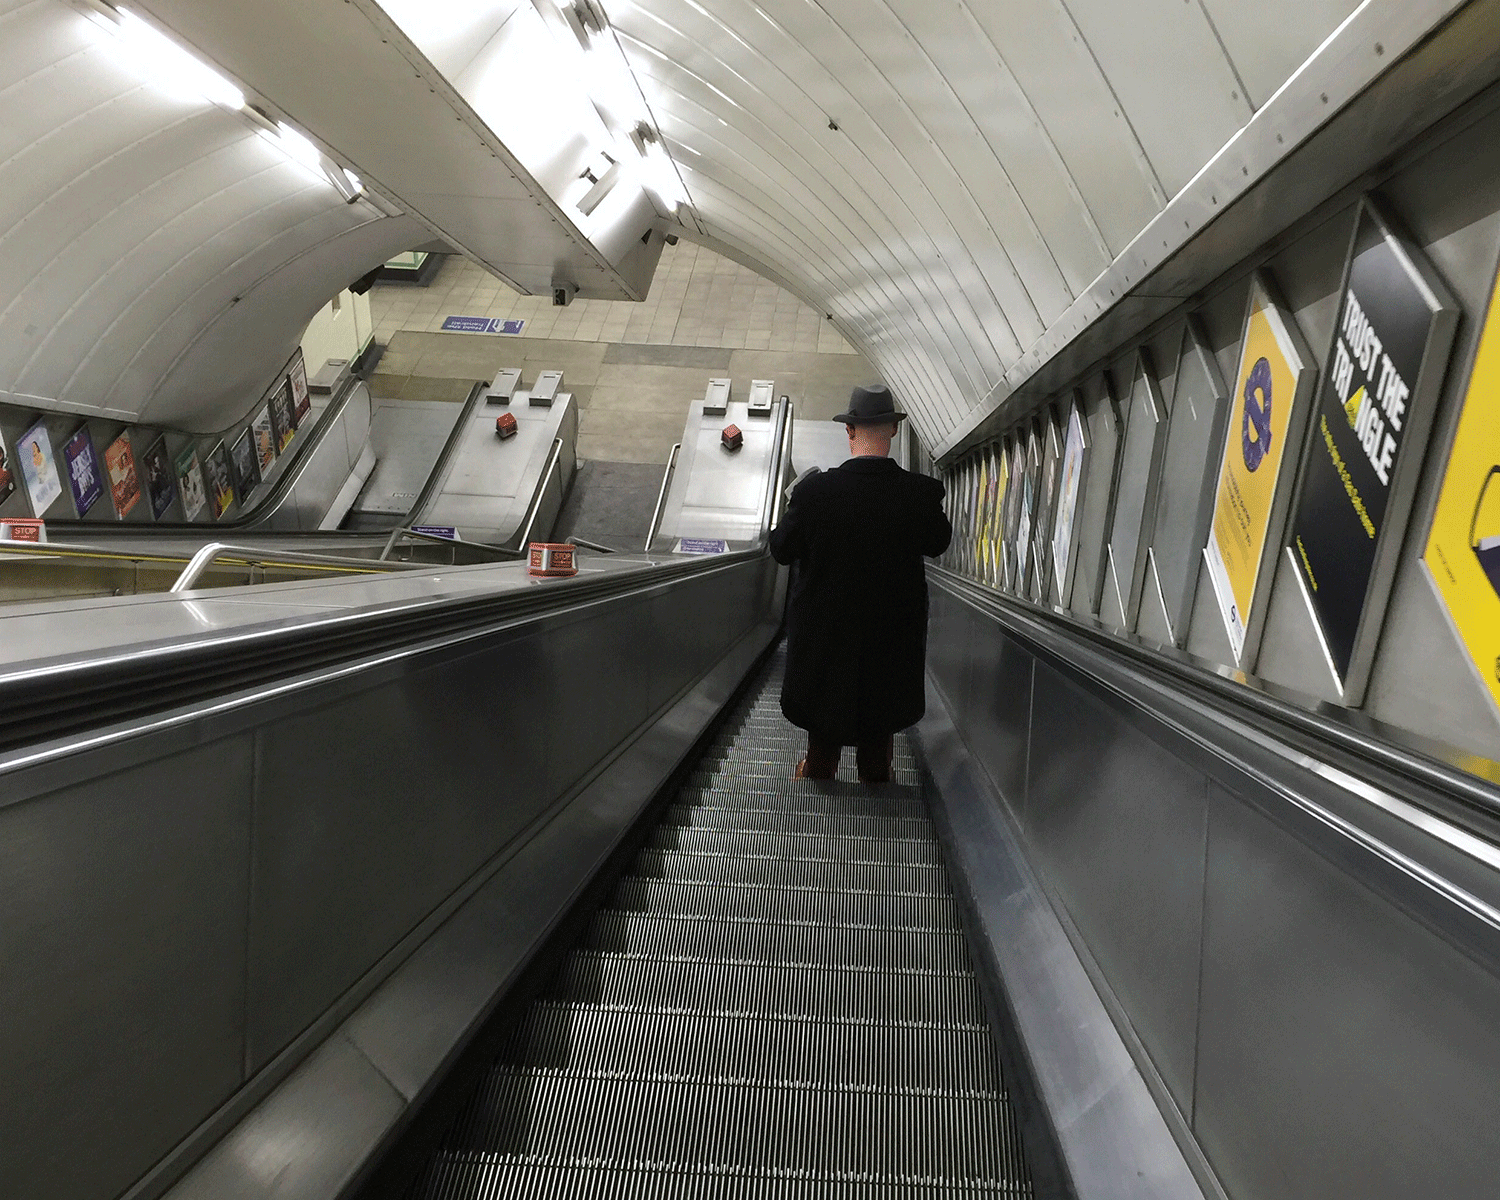 London Underground finds 57 tube stations are at 'high risk' of